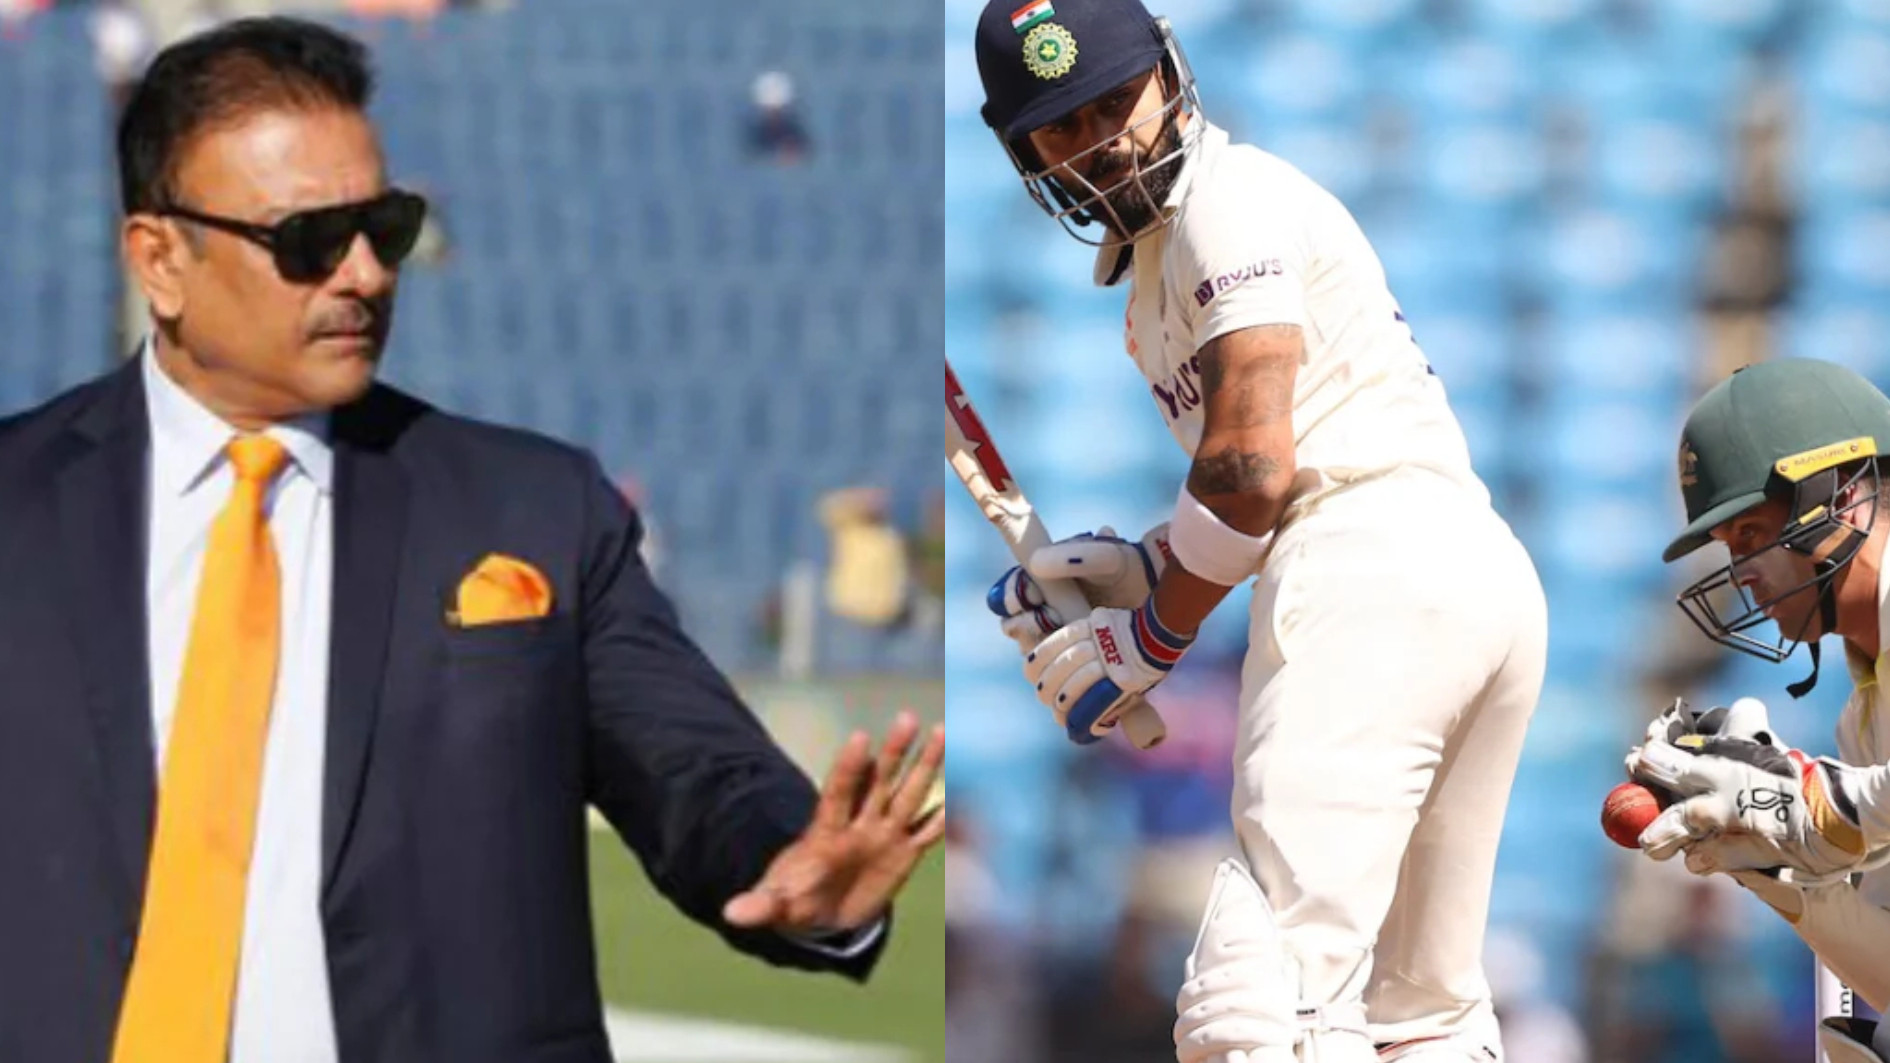 IND vs AUS 2023: “He was unlucky, no need to talk about technique”- Ravi Shastri on Virat Kohli's dismissal in Nagpur Test